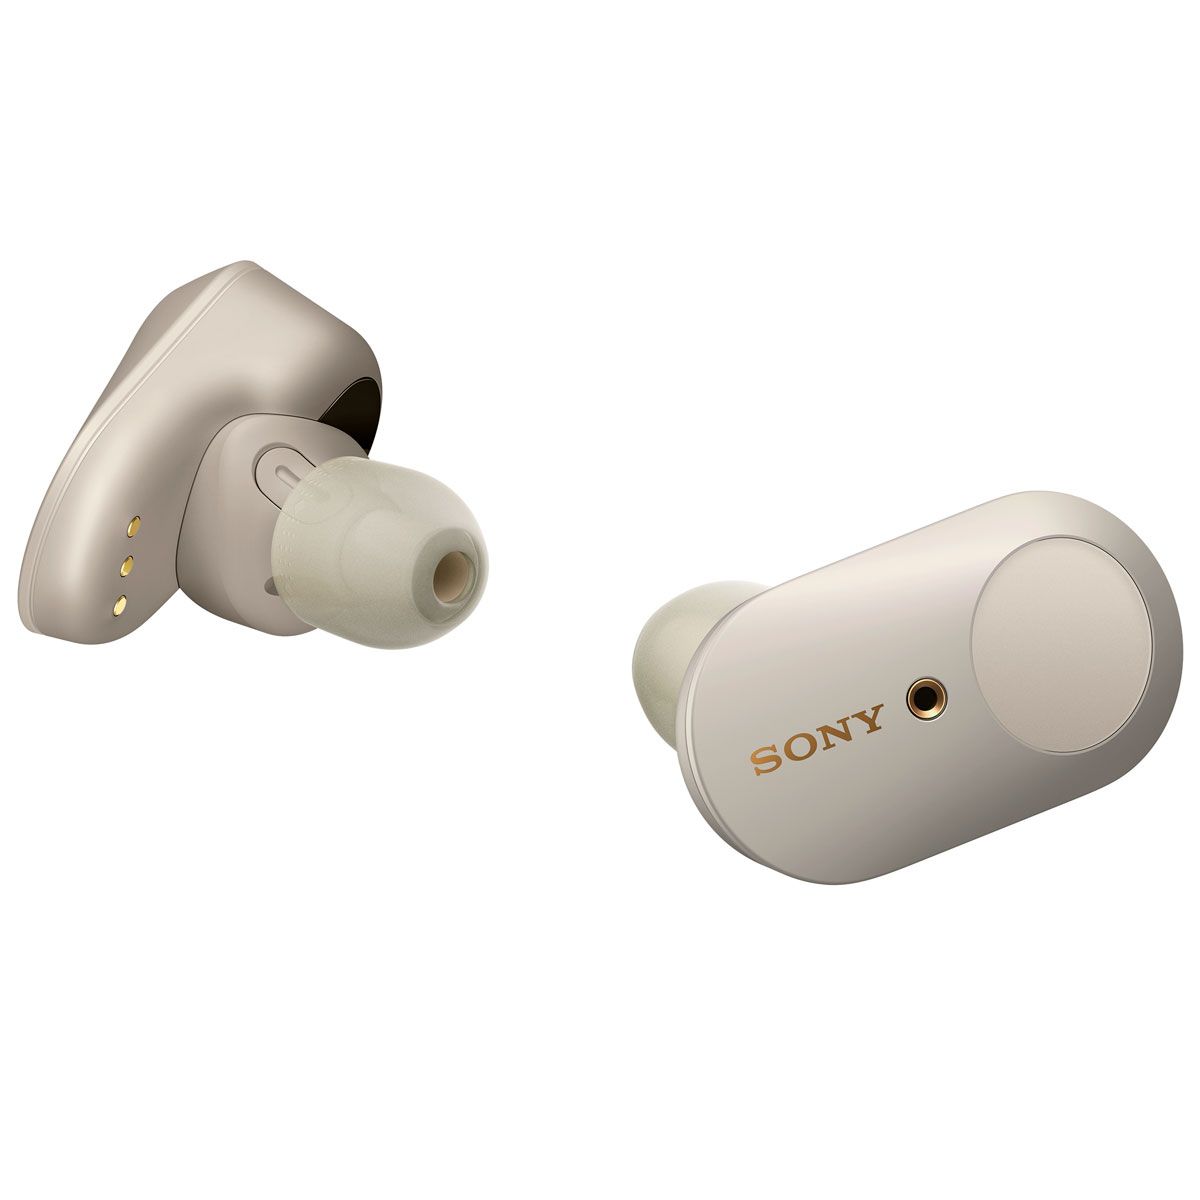 Sony WF-1000XM3 Noise Cancelling Truly Wireless In-Ear Headphones - silver - Front angled view